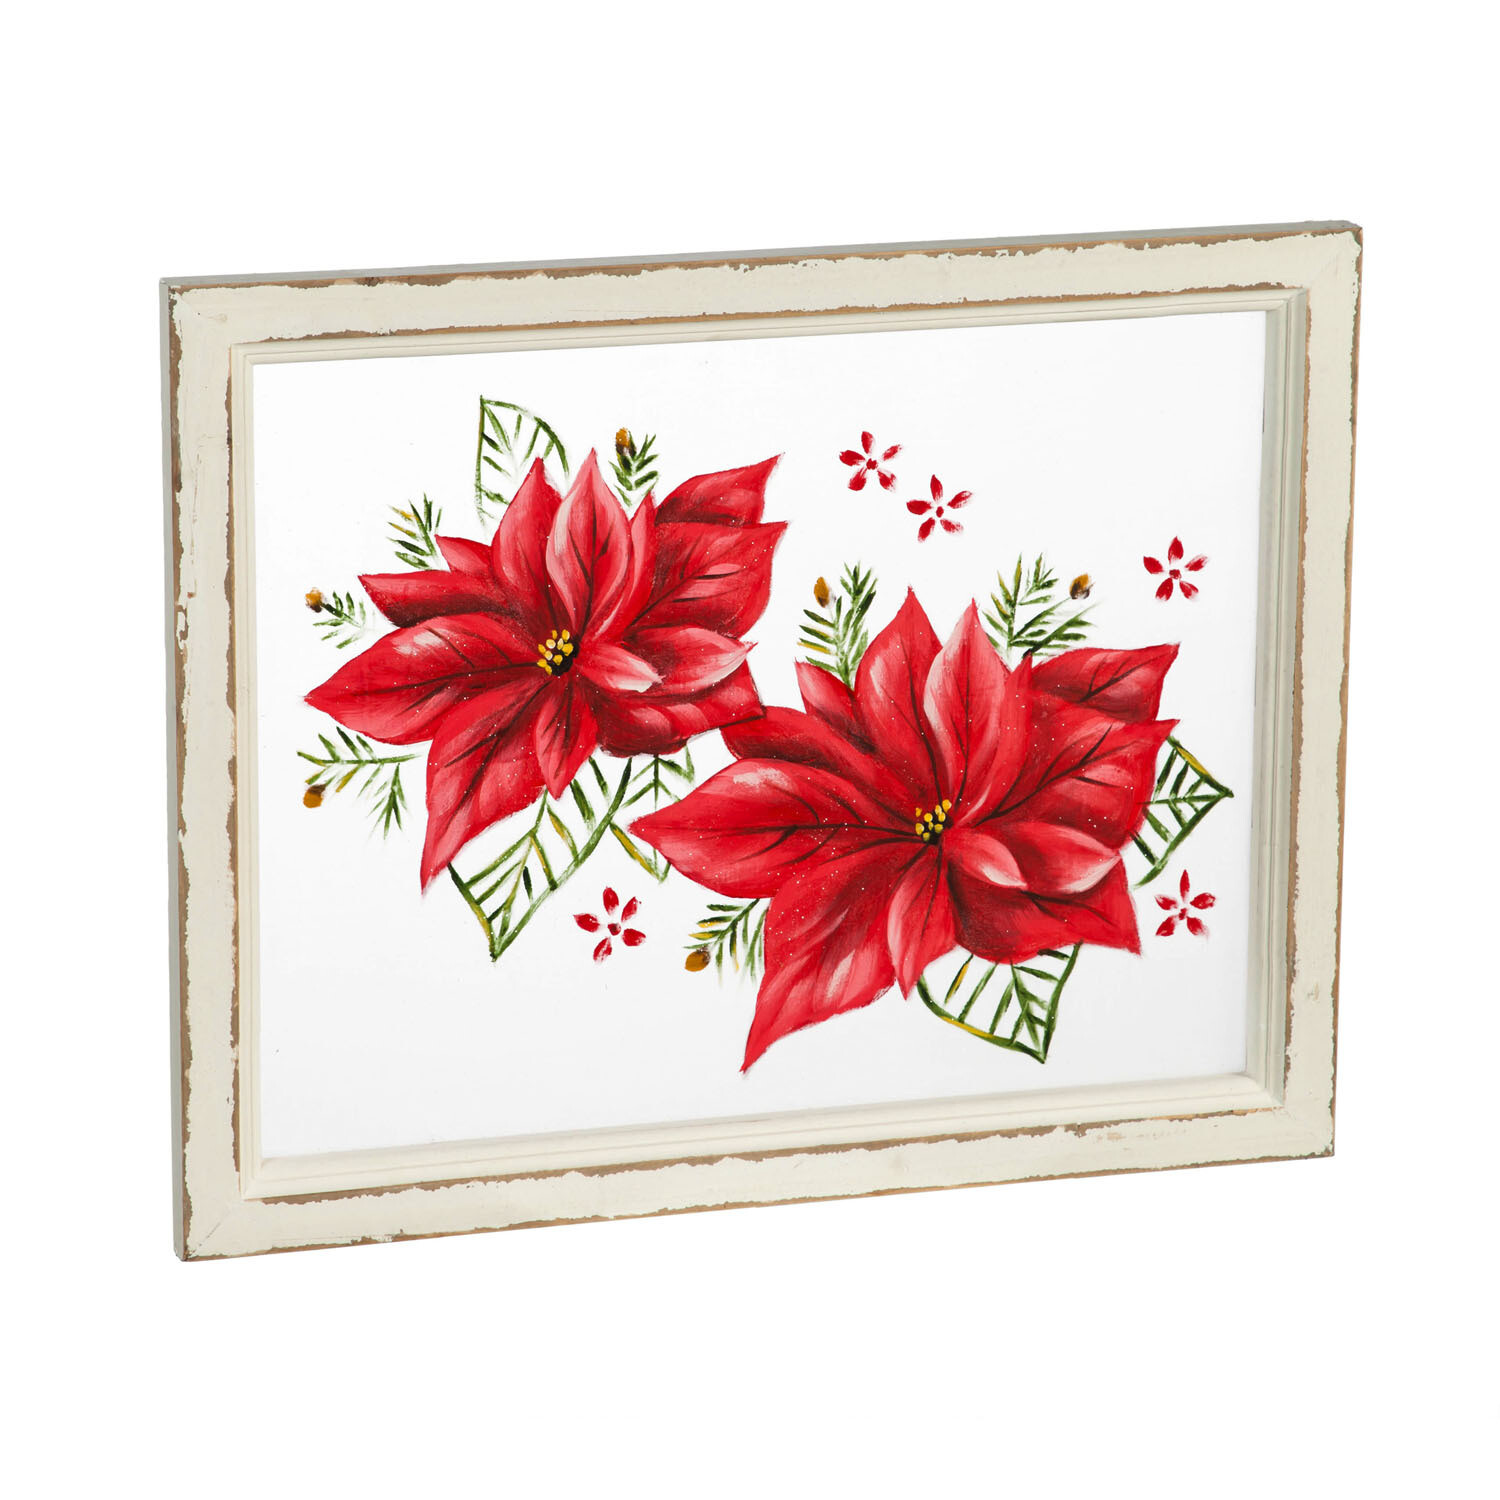 FINAL SALE - Poinsettias Hand Painted Screen Wood Frame